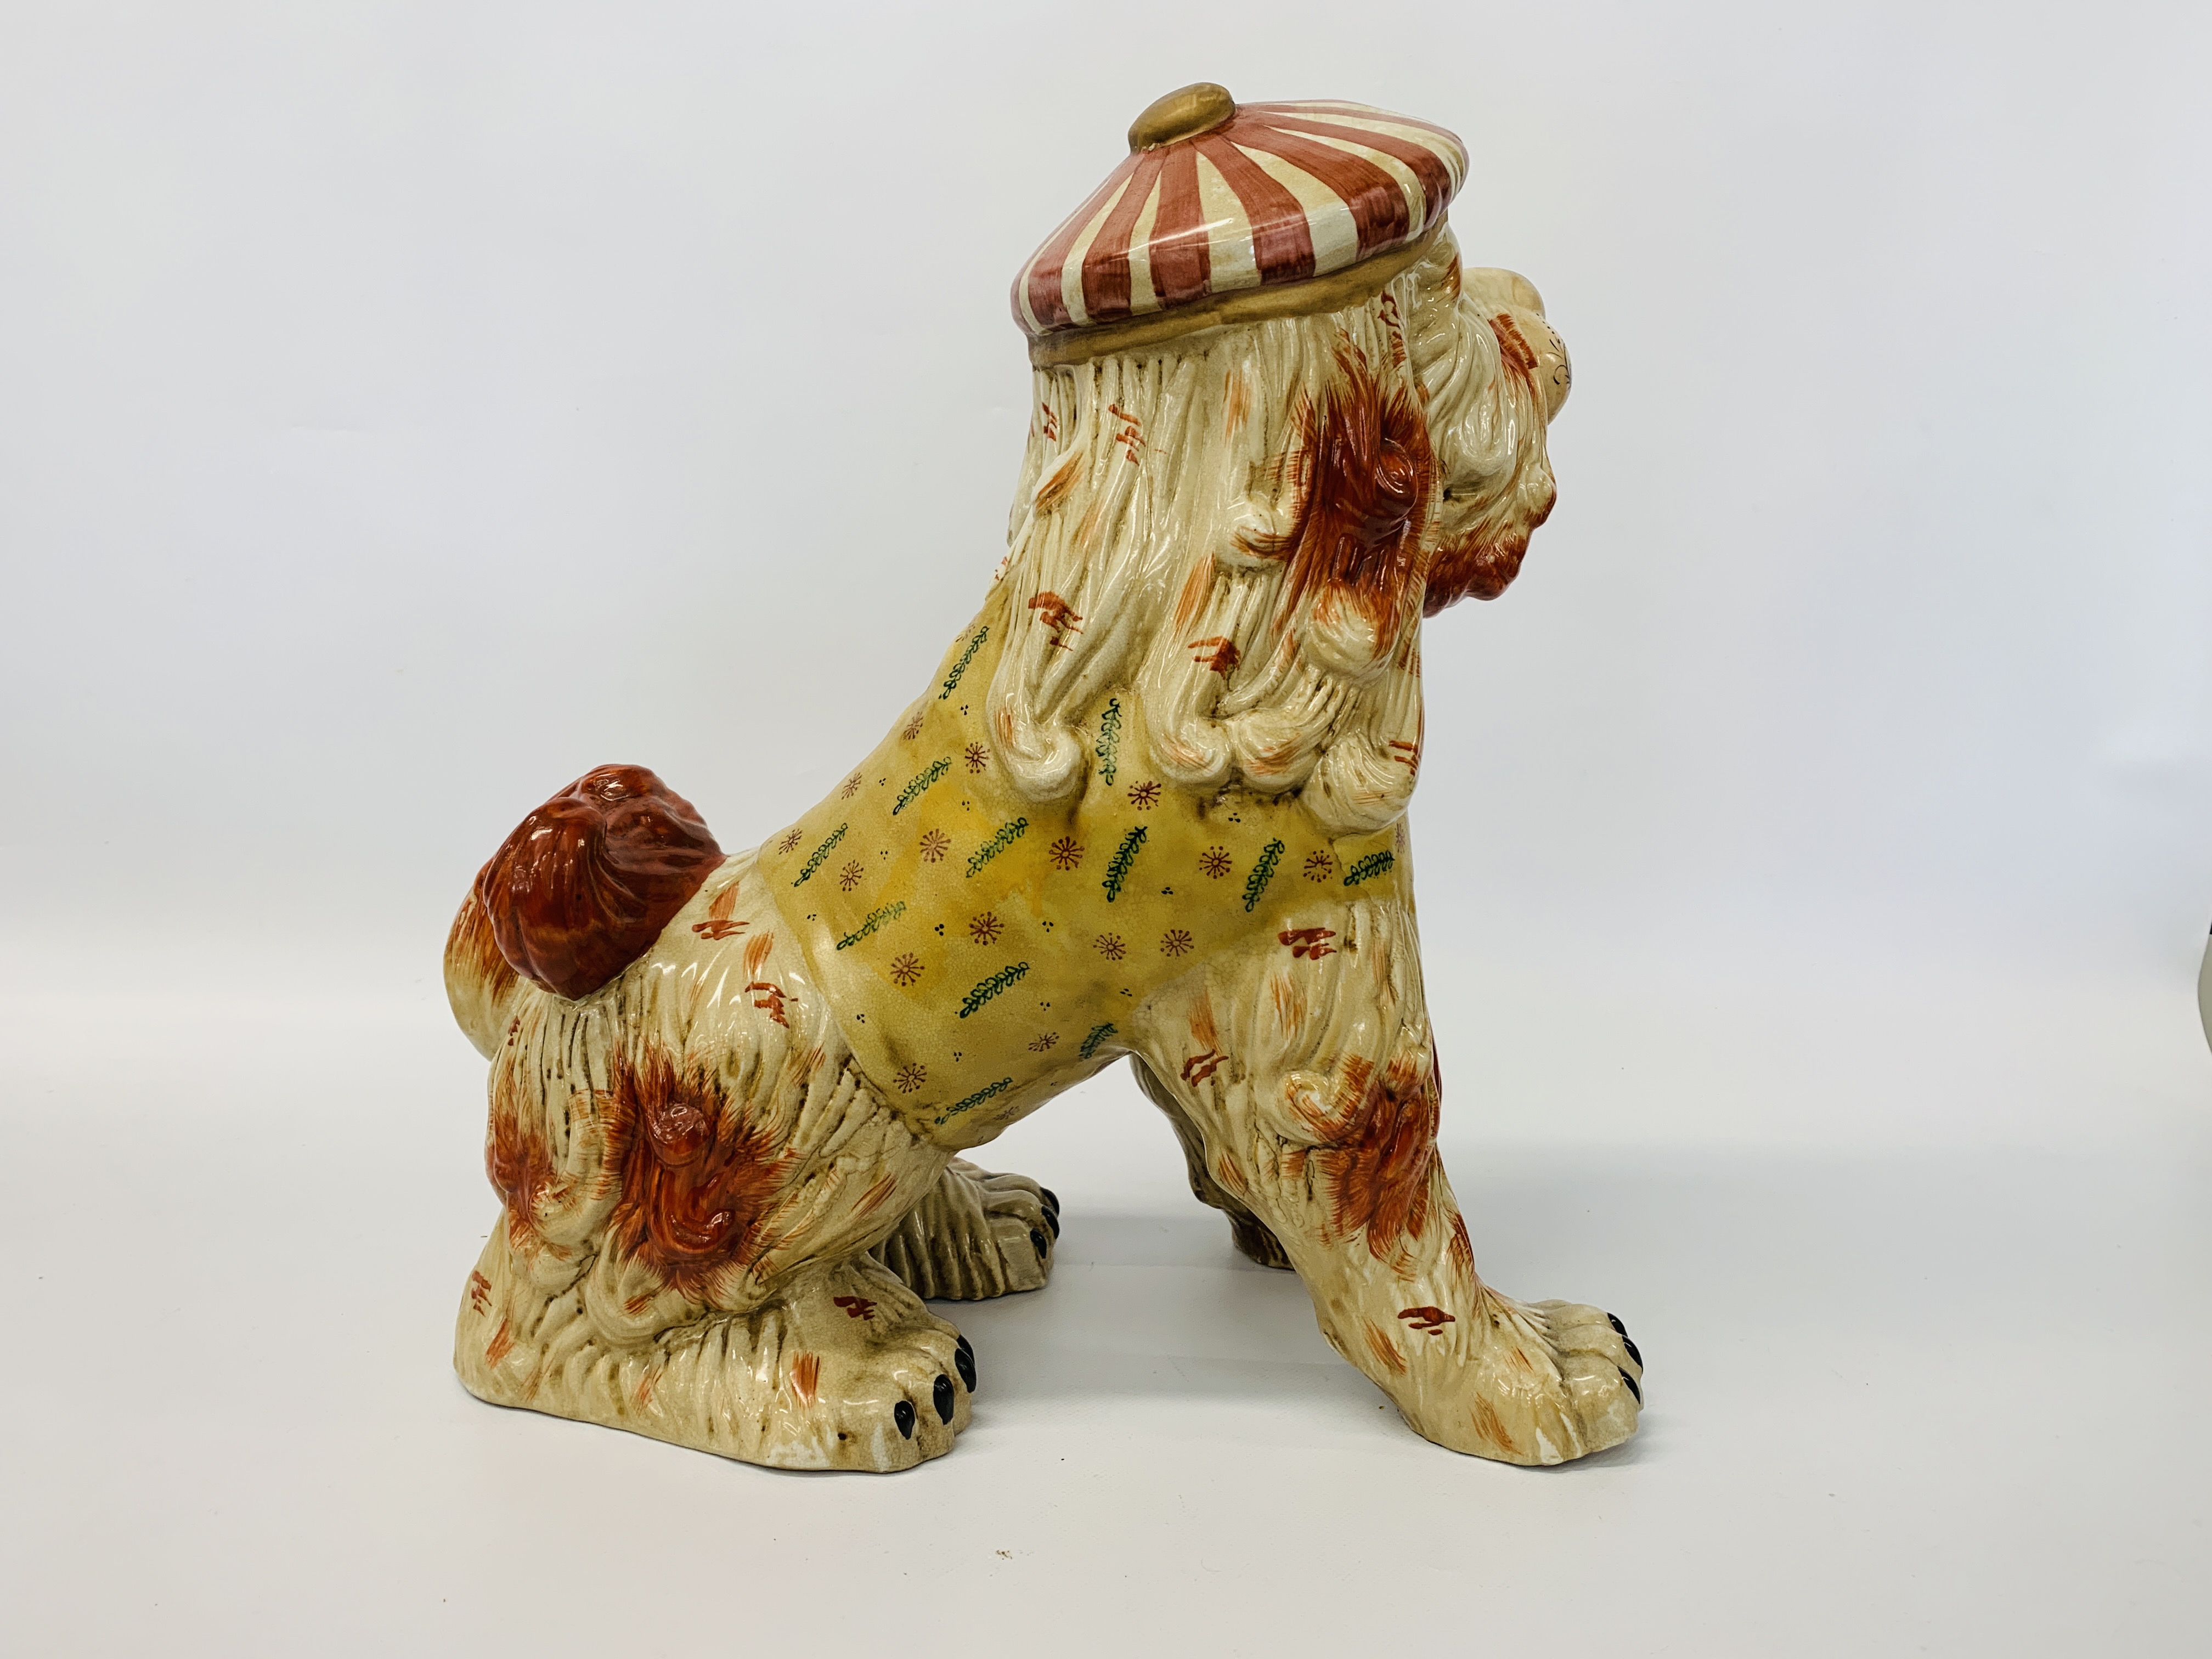 A LARGE REPRODUCTION STAFFORDSHIRE STYLE DOG ORNAMENT "JOCK" HEIGHT 45cm - Image 7 of 8